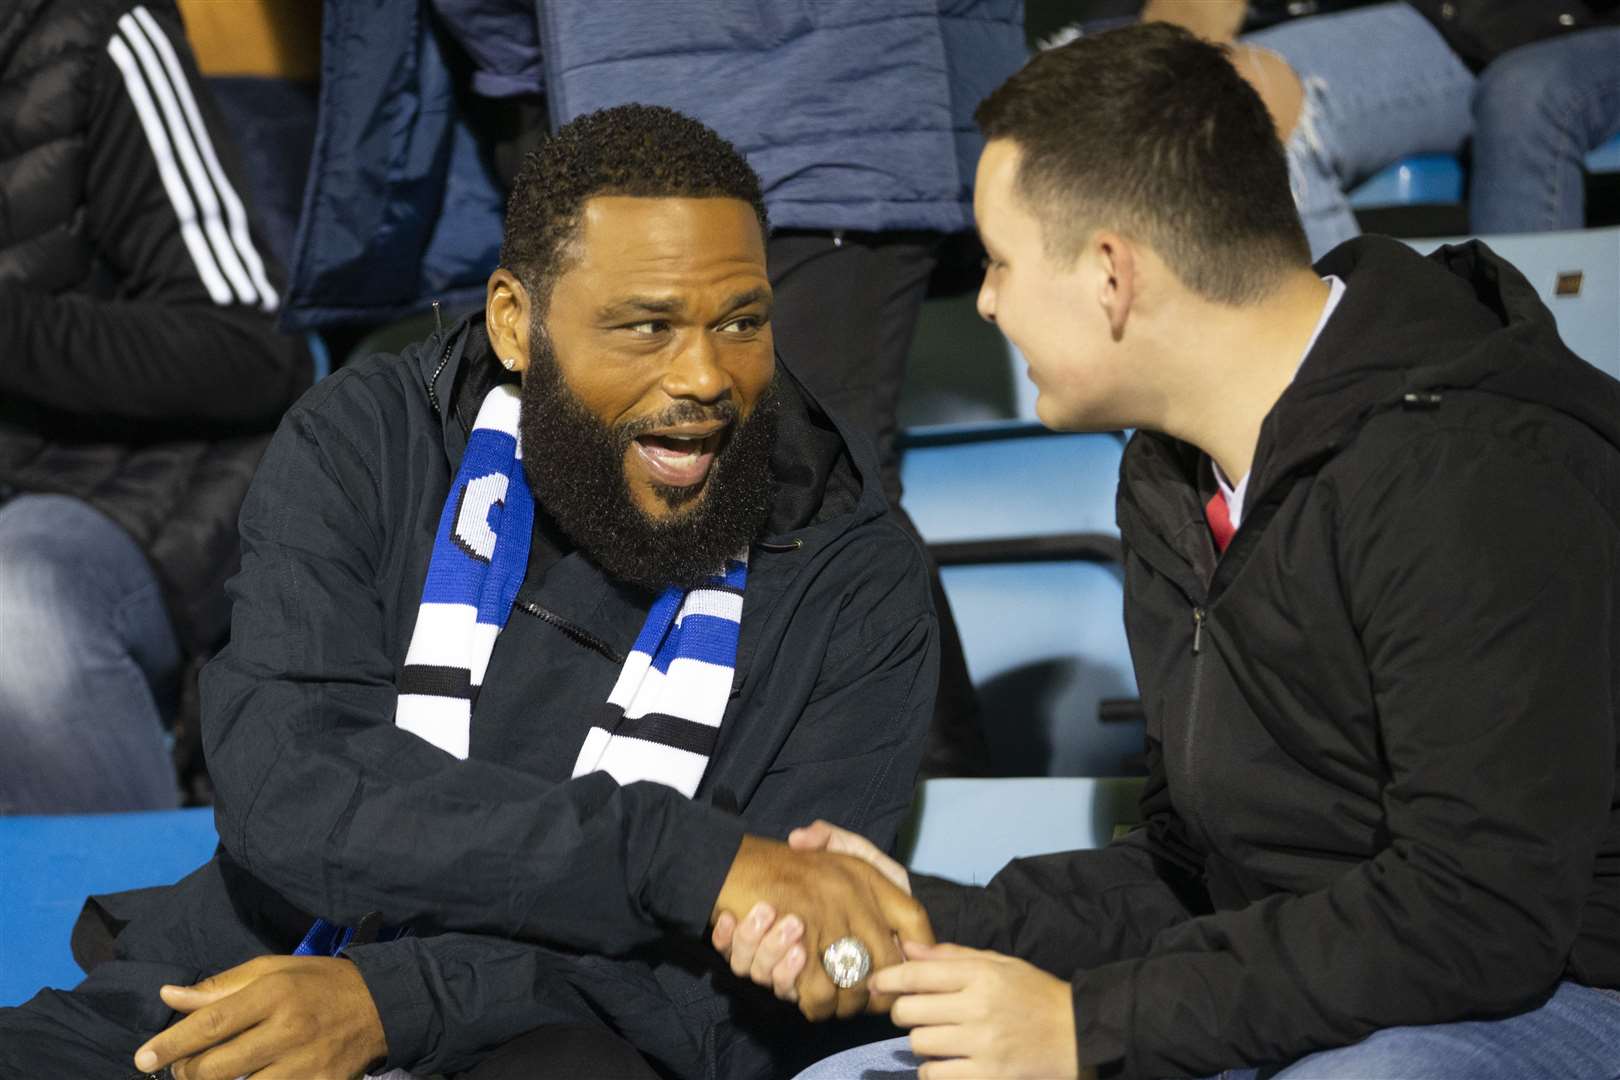 Anthony chatted to Gills fans while watching the game. Picture: Kent Pro Images